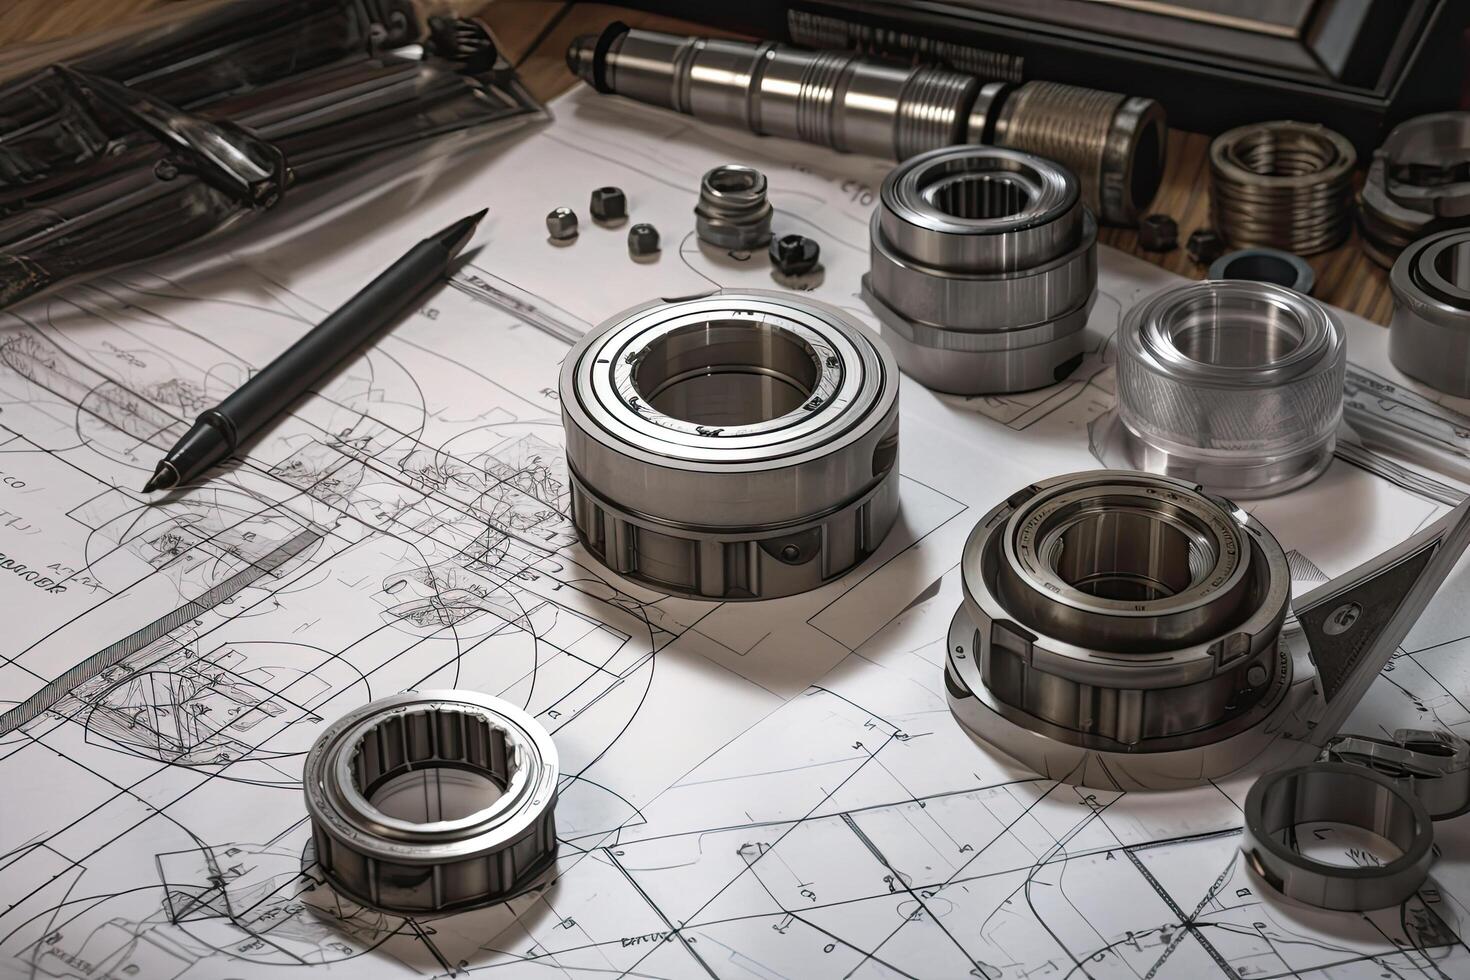 Set of metal ball bearing and other tools on the background of technical drawings, Engineering and technician drawings and designs on table, photo